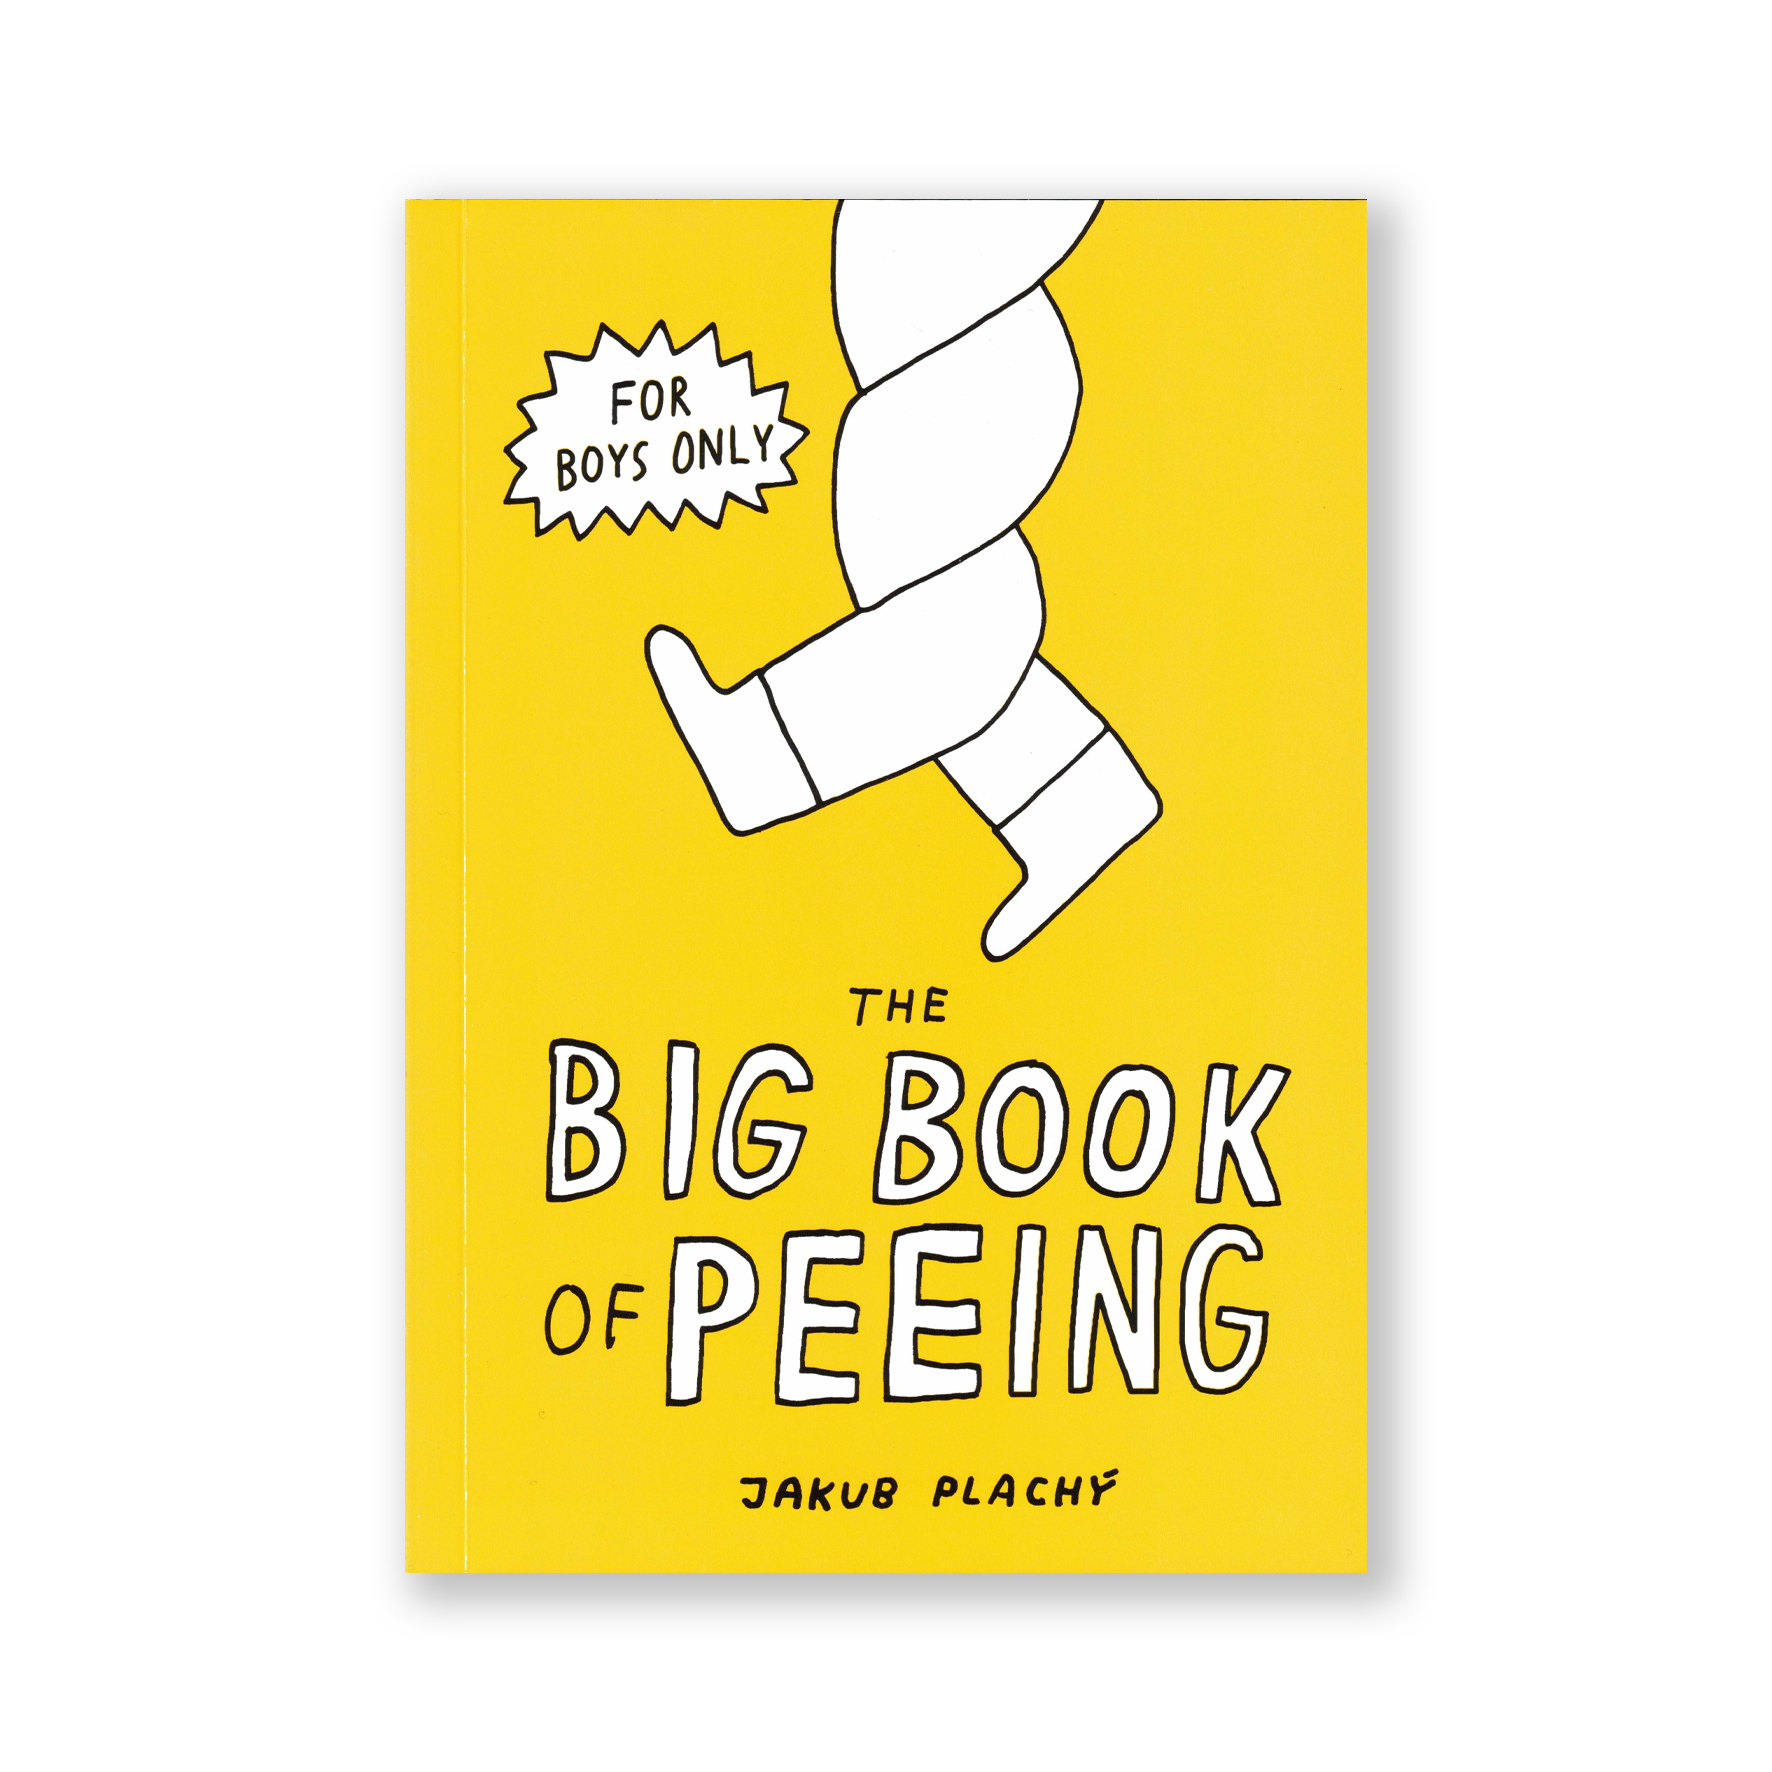 THE BIG BOOK OF PEEING